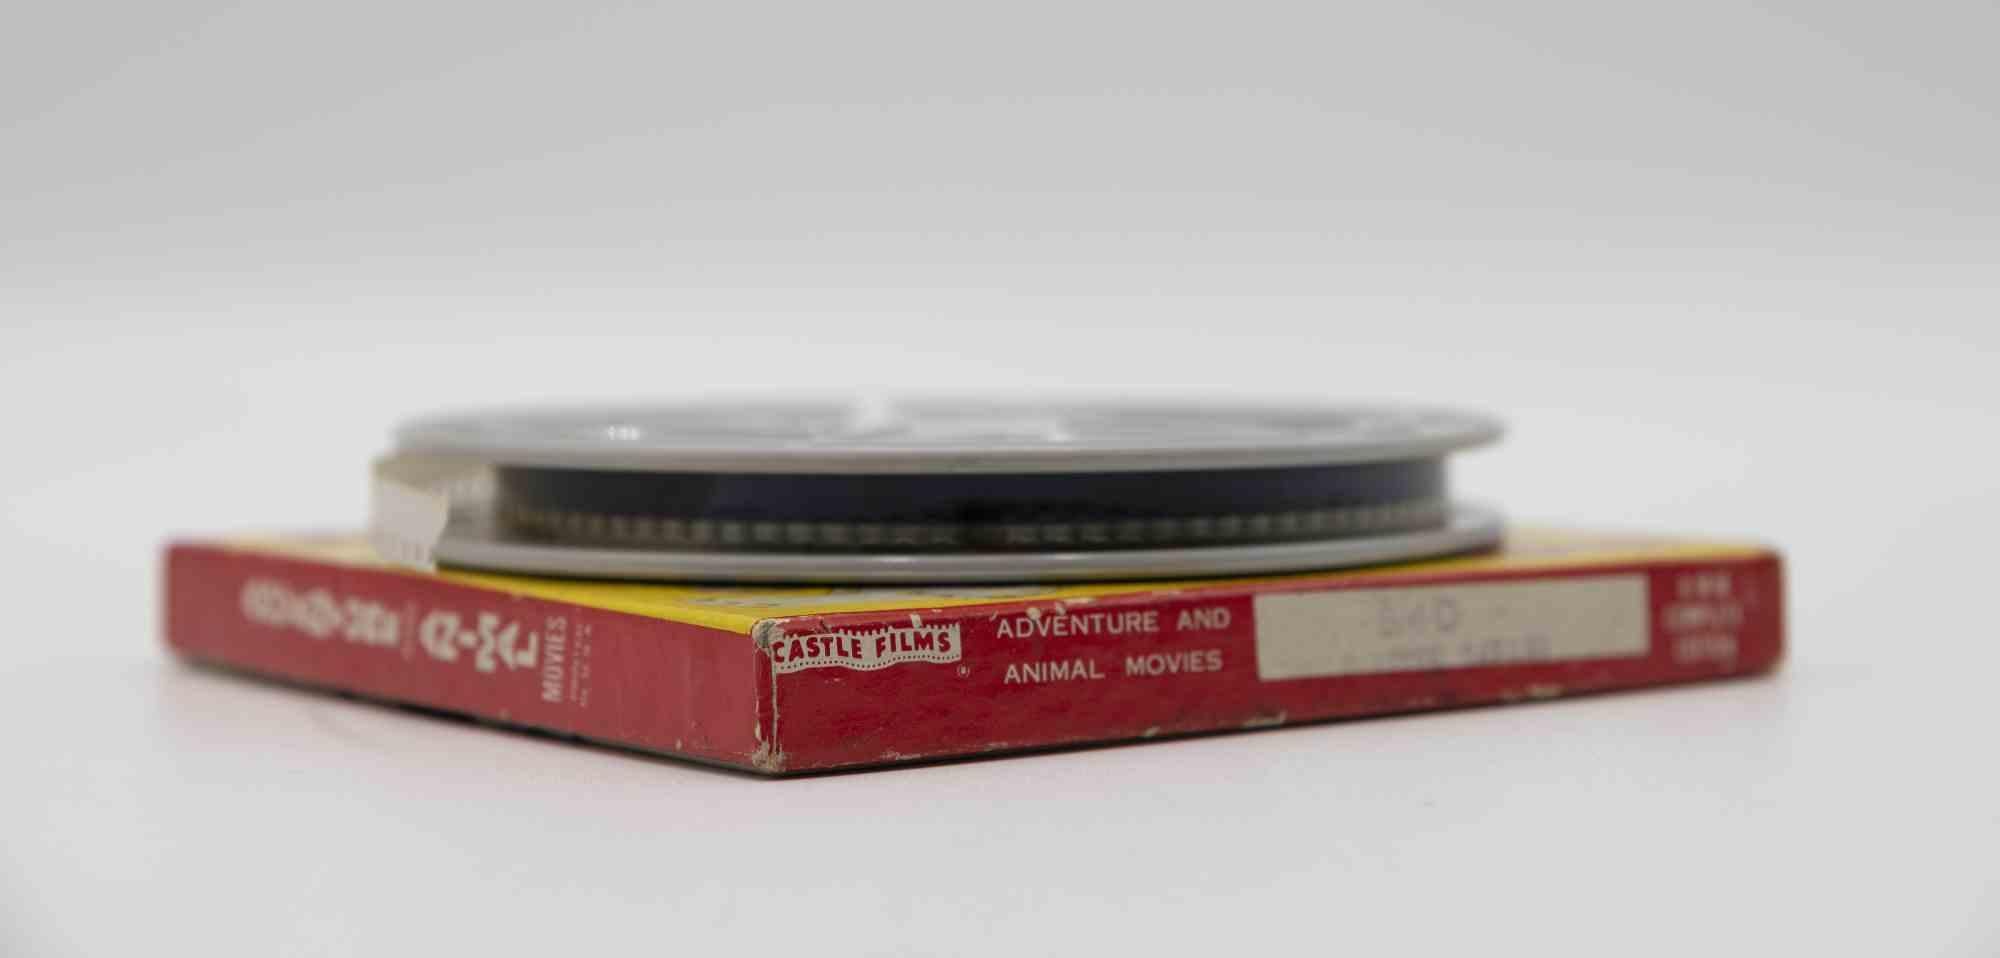 Wild river safari is an original film from the 1940s.

It includes original packaging.

8mm or 16mm.

Good conditions